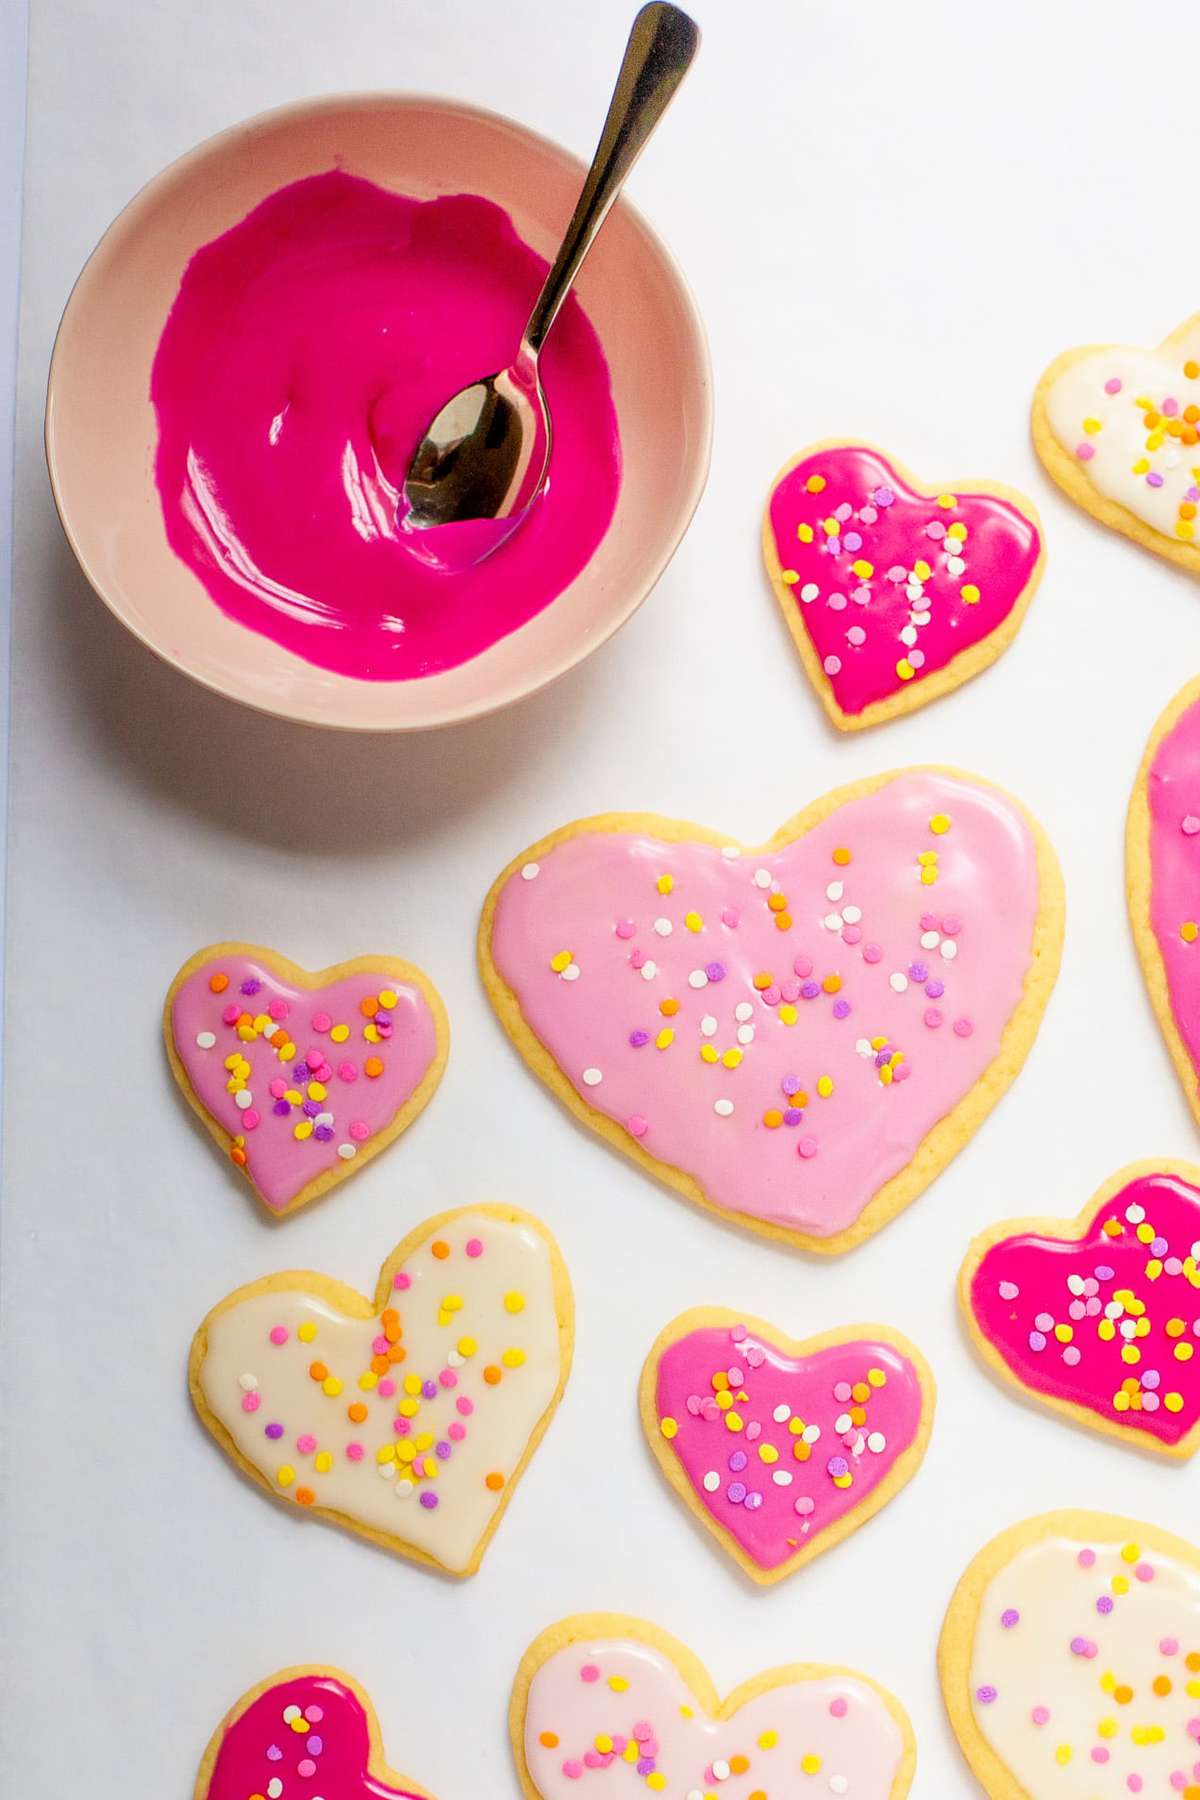 A pink bowl of sugar cookie icing sits next to heart-shaped cookies.